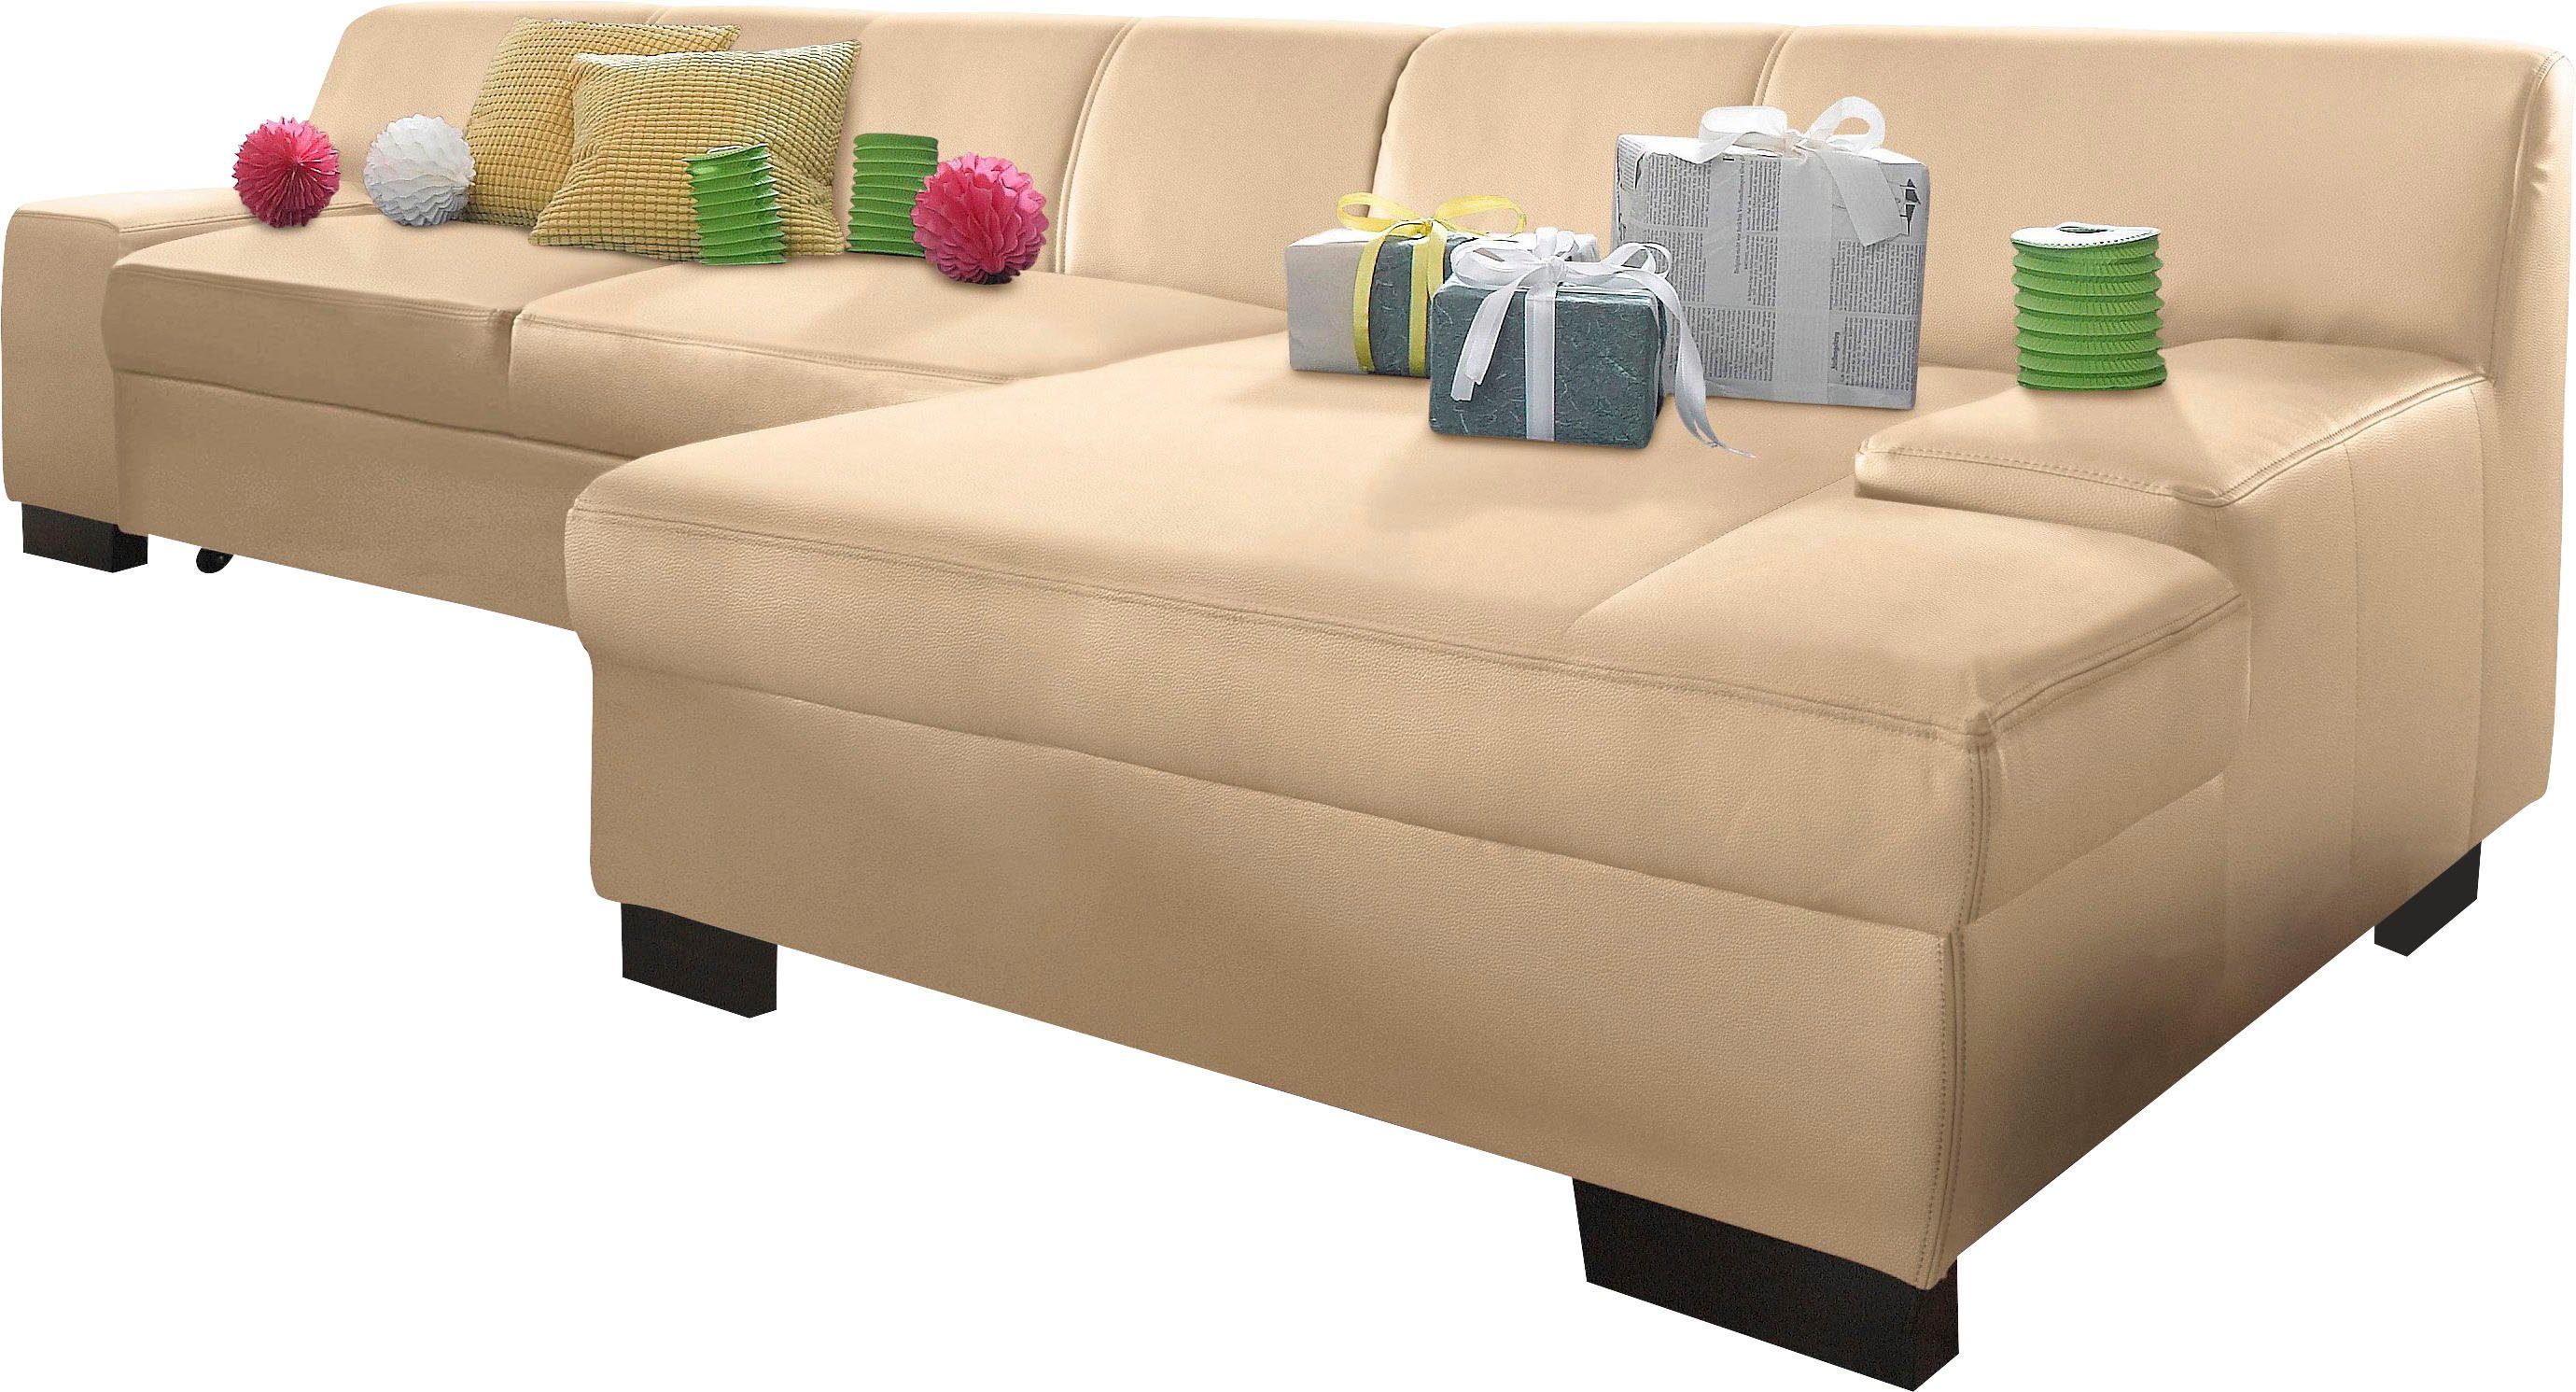 DOMO collection Ecksofa »Norma«, wahlweise mit Bettfunktion-Otto